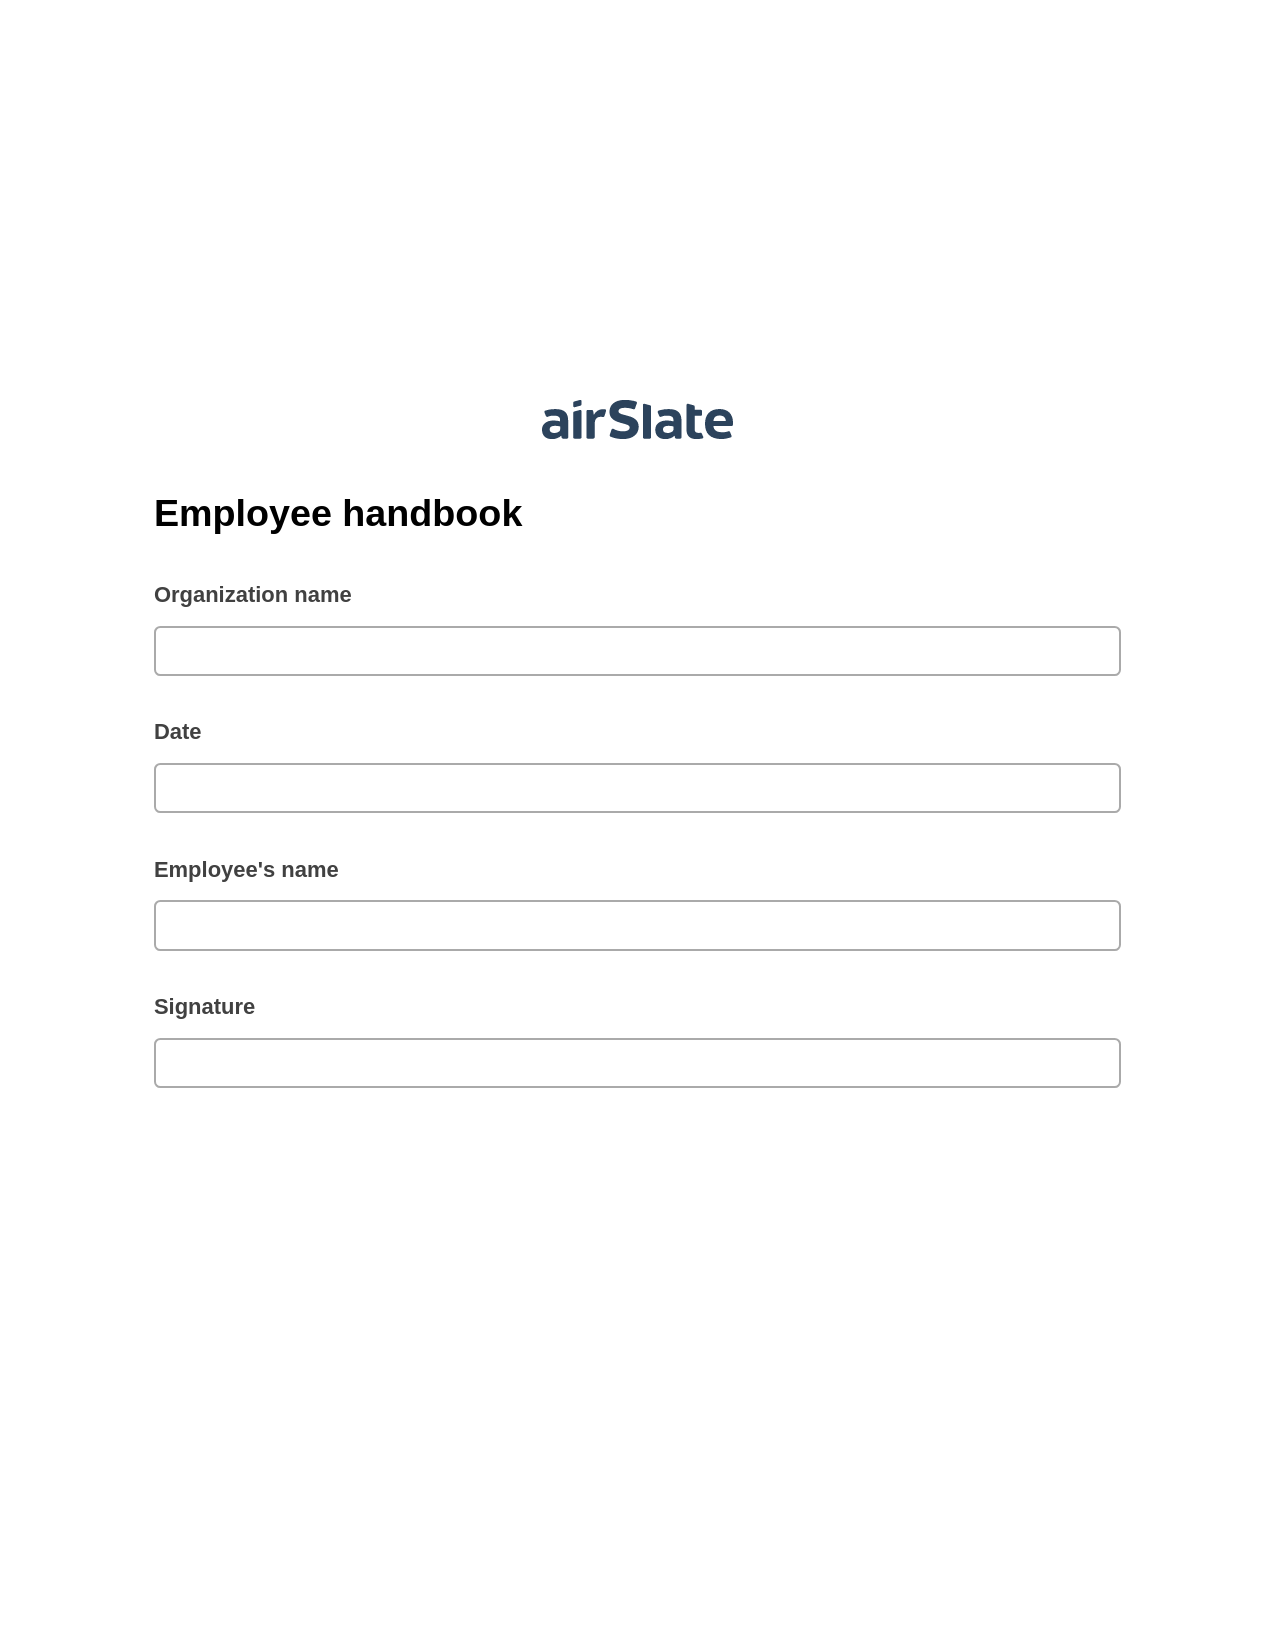 Employee handbook Pre-fill Slate from MS Dynamics 365 Records Bot, Roles Reminder Bot, Archive to SharePoint Folder Bot